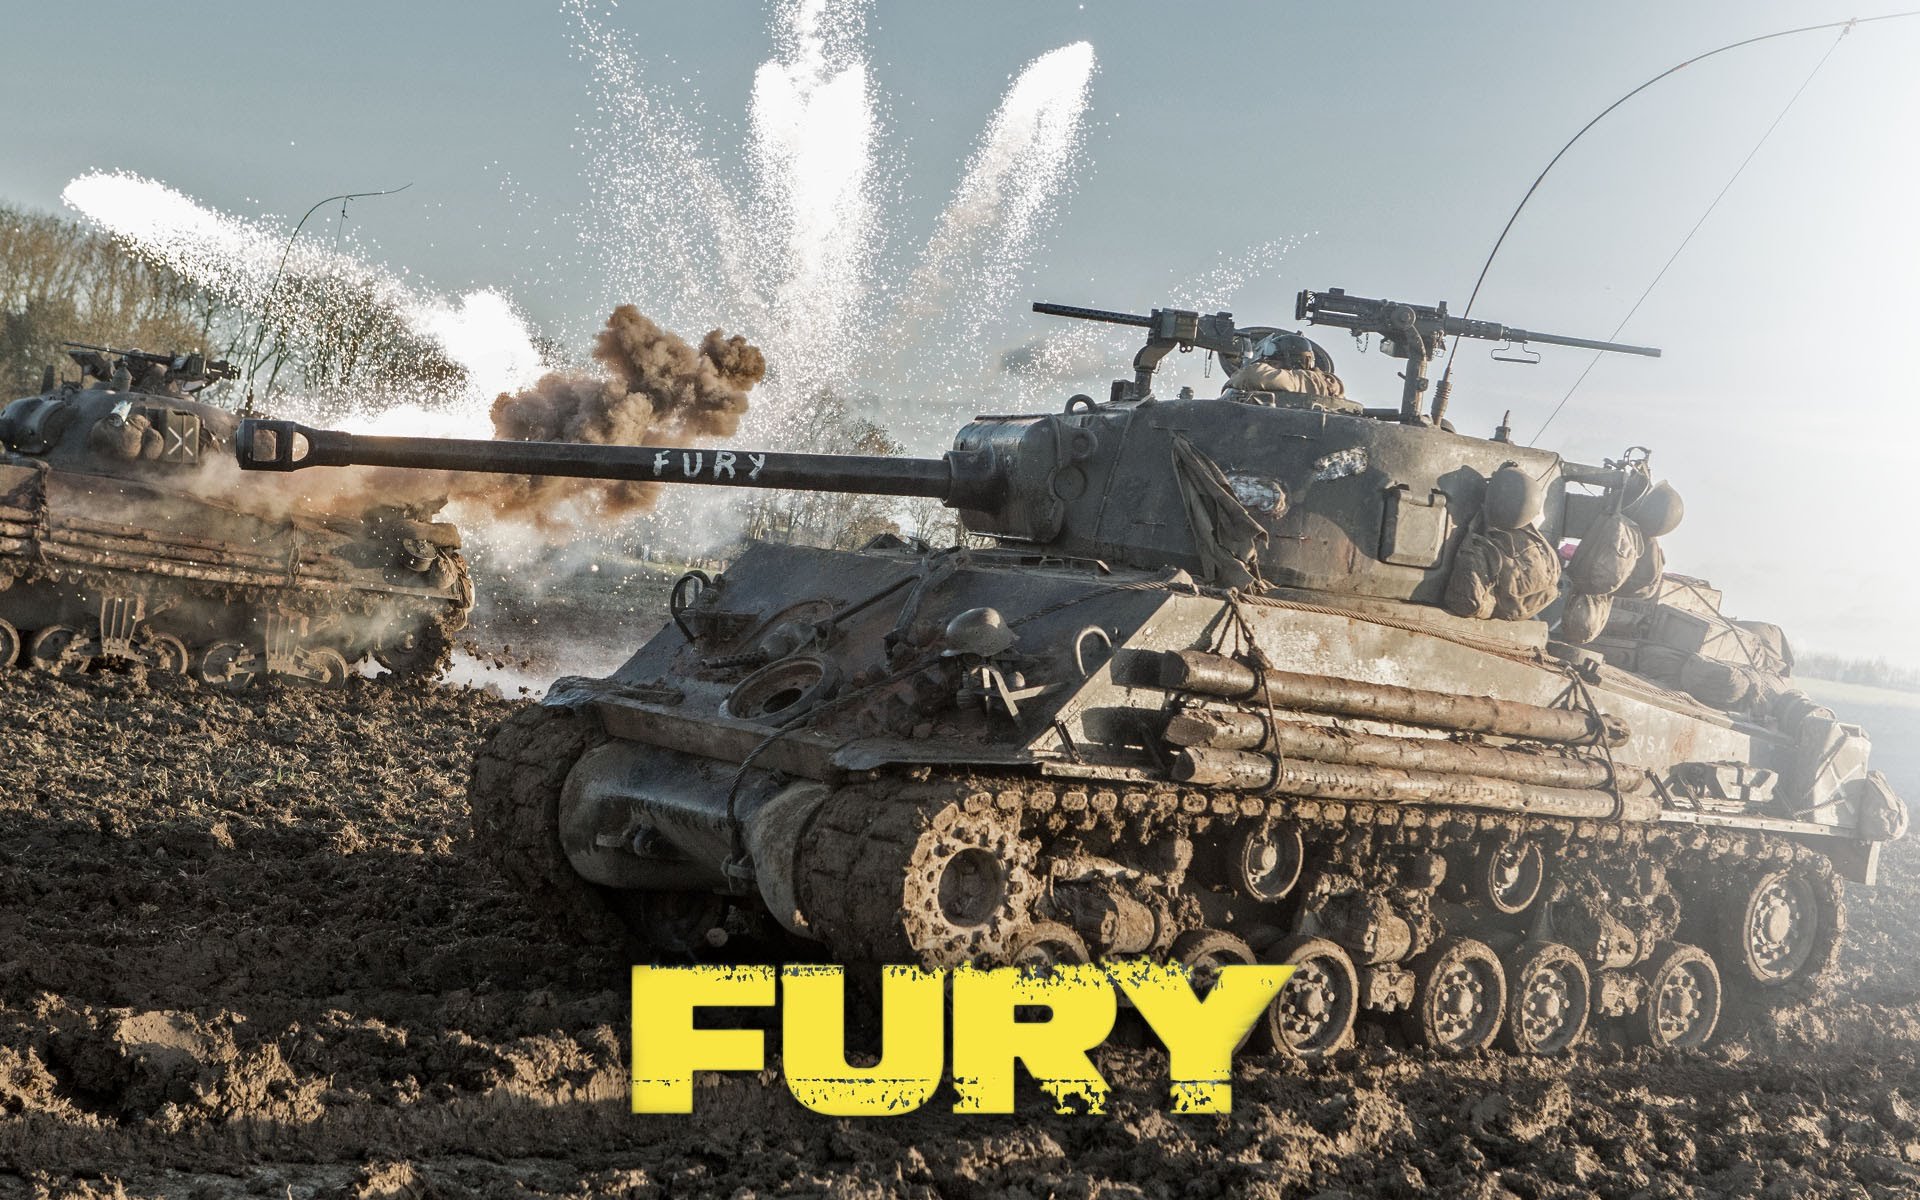 fury, Action, Drama, War, Brad, Pitt, Military, Tank, War, 1fury, Fighting Wallpapers HD / Desktop and Mobile Backgrounds